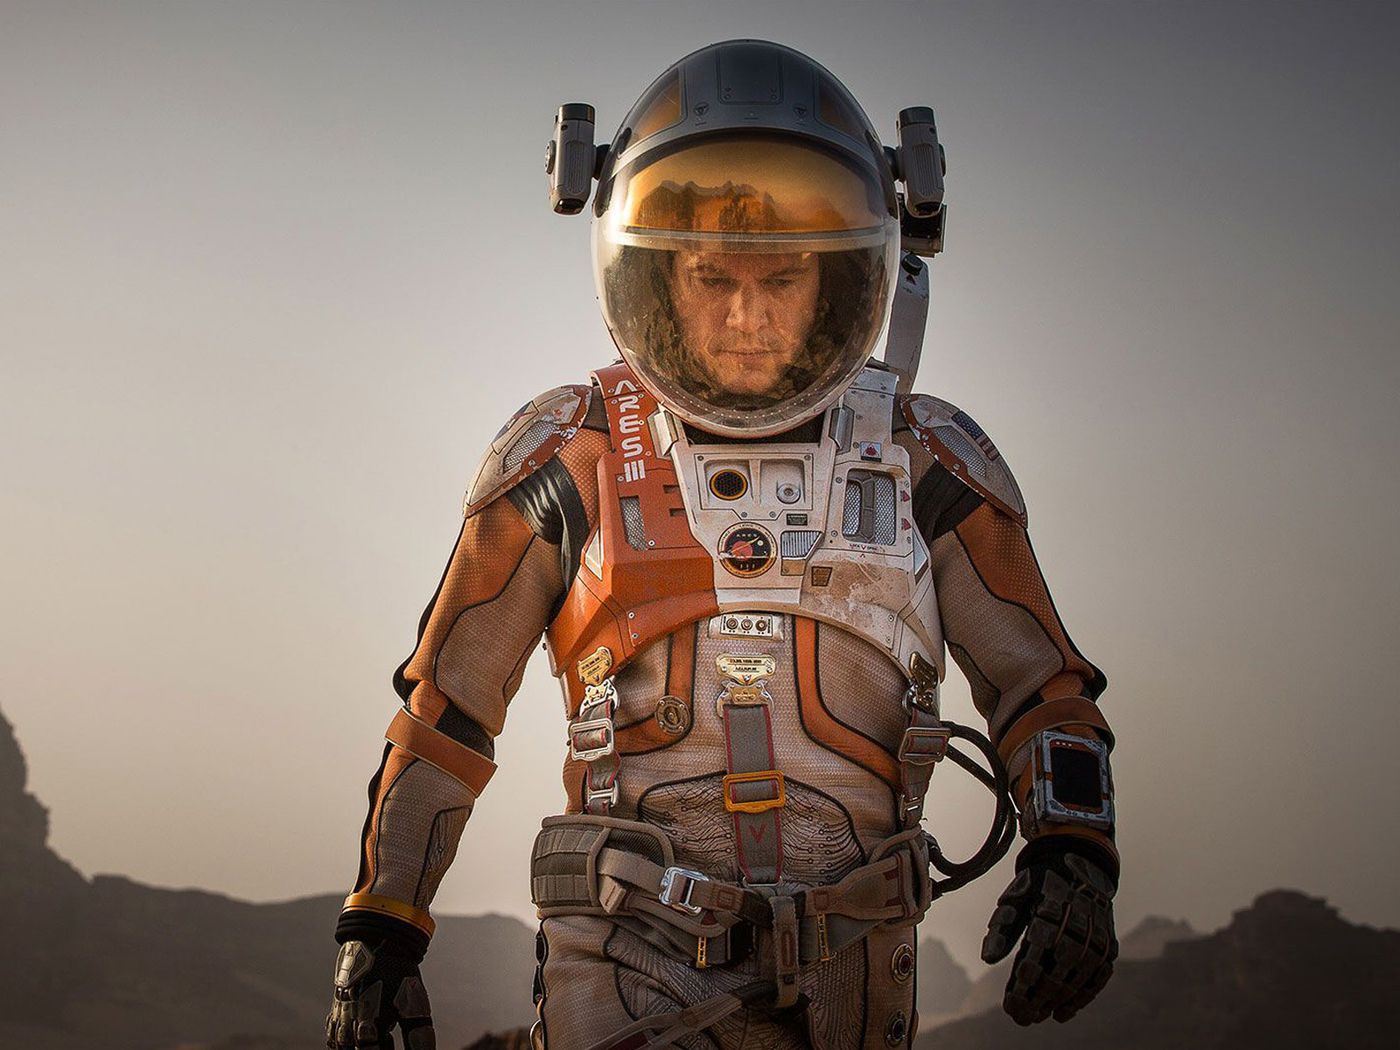 Space Suits From Science Fiction Worst To Best